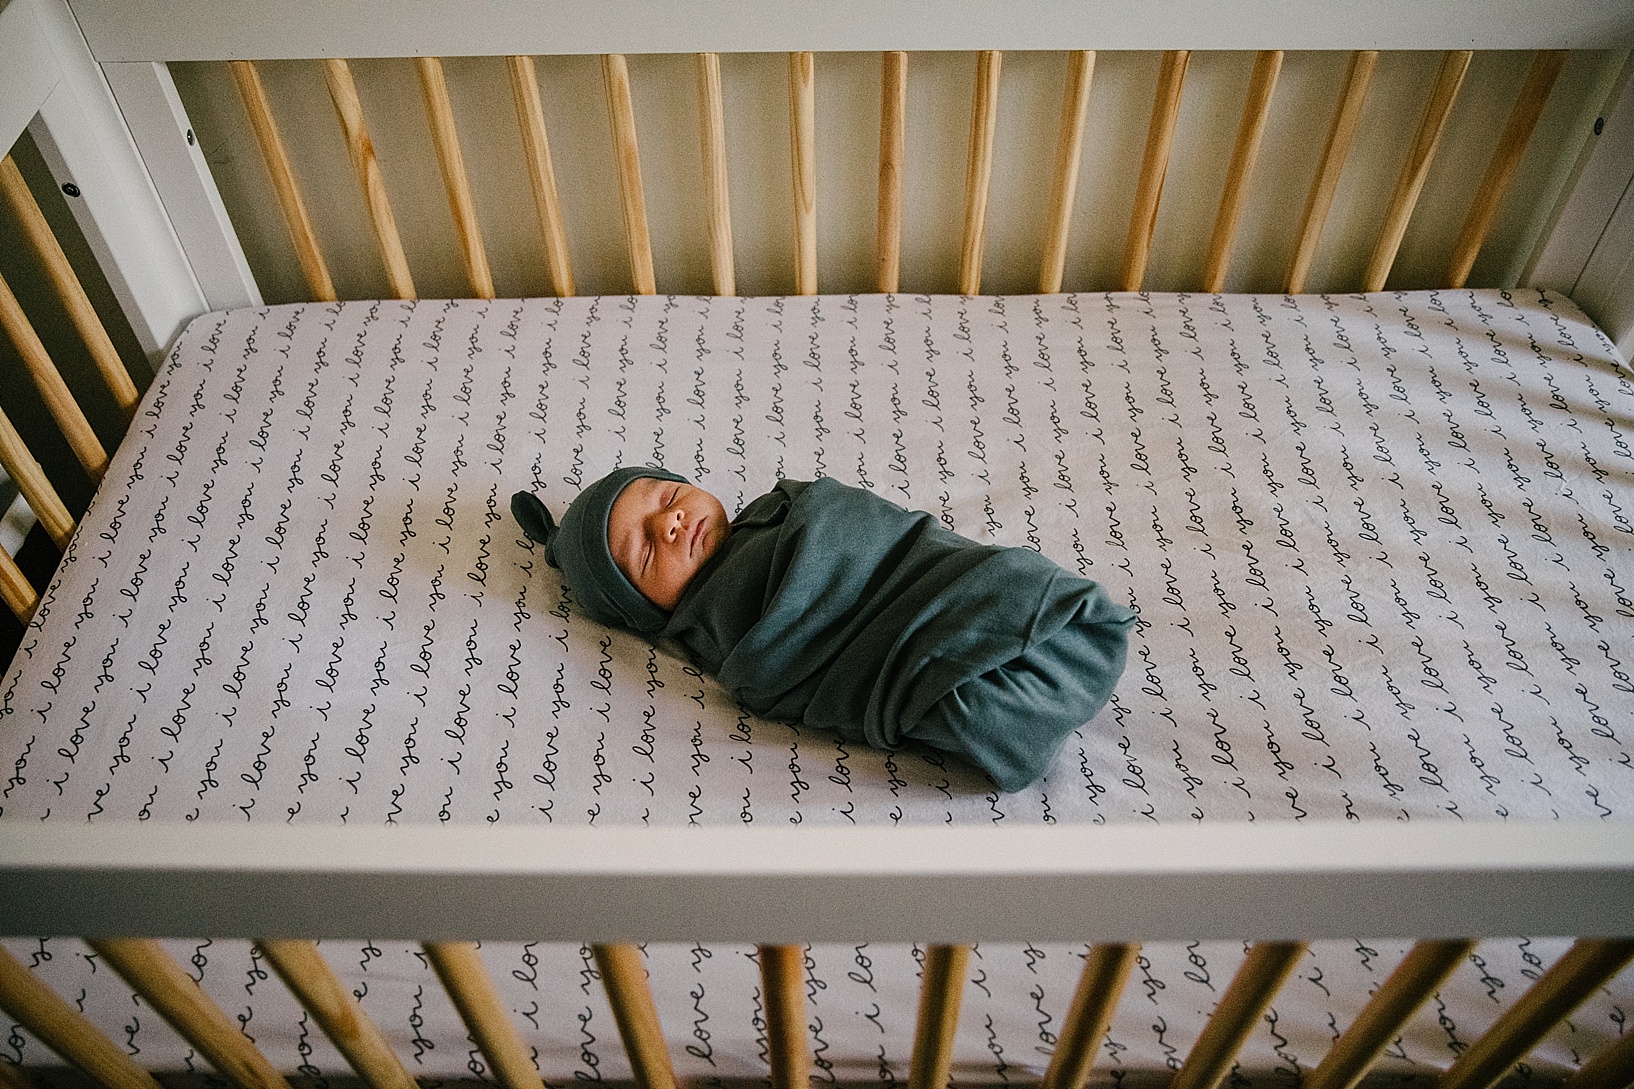 newborn baby swaddled in blanket laying in crib